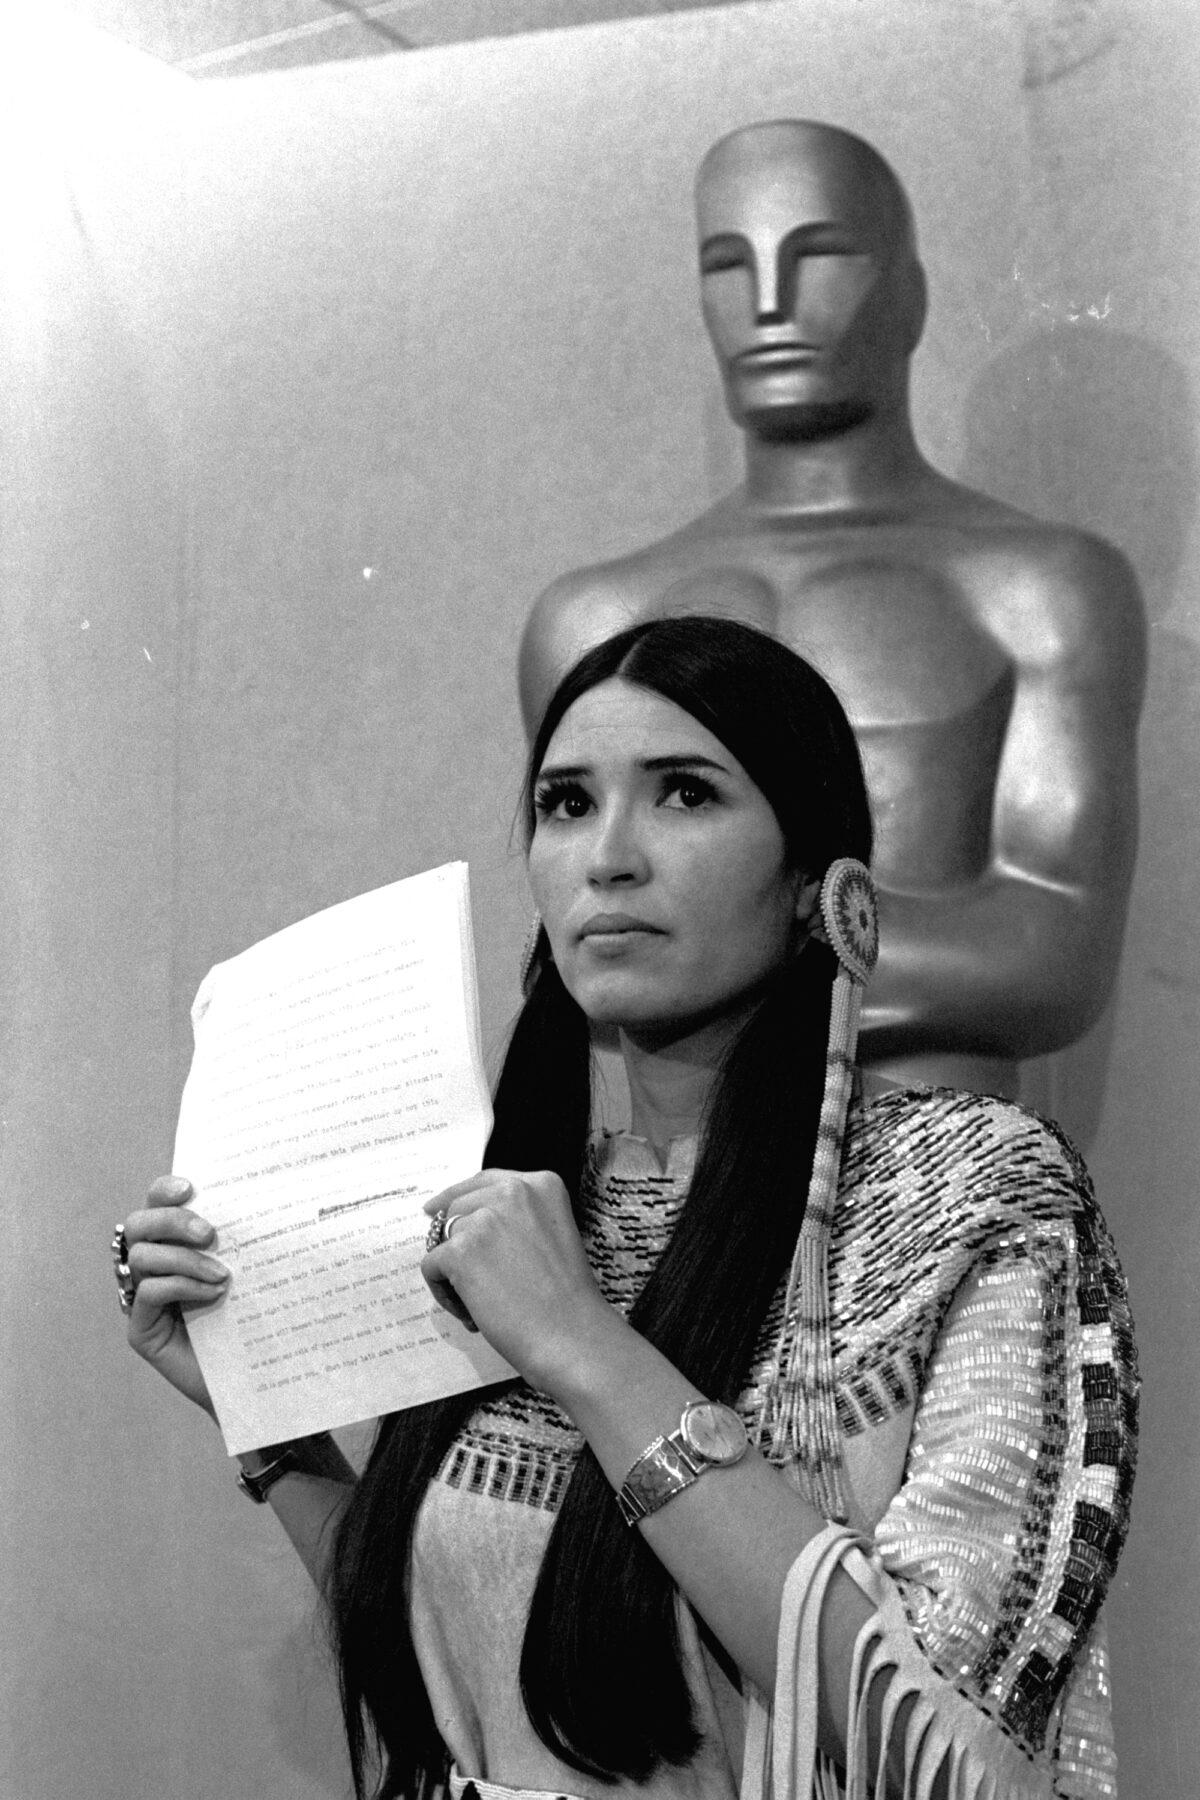 Sacheen Littlefeather, a Native American activist, tells the audience at the Academy Awards ceremony in Los Angeles, on March 27, 1973, that Marlon Brando was declining to accept his Oscar as best actor for his role in "The Godfather." (AP Photo)